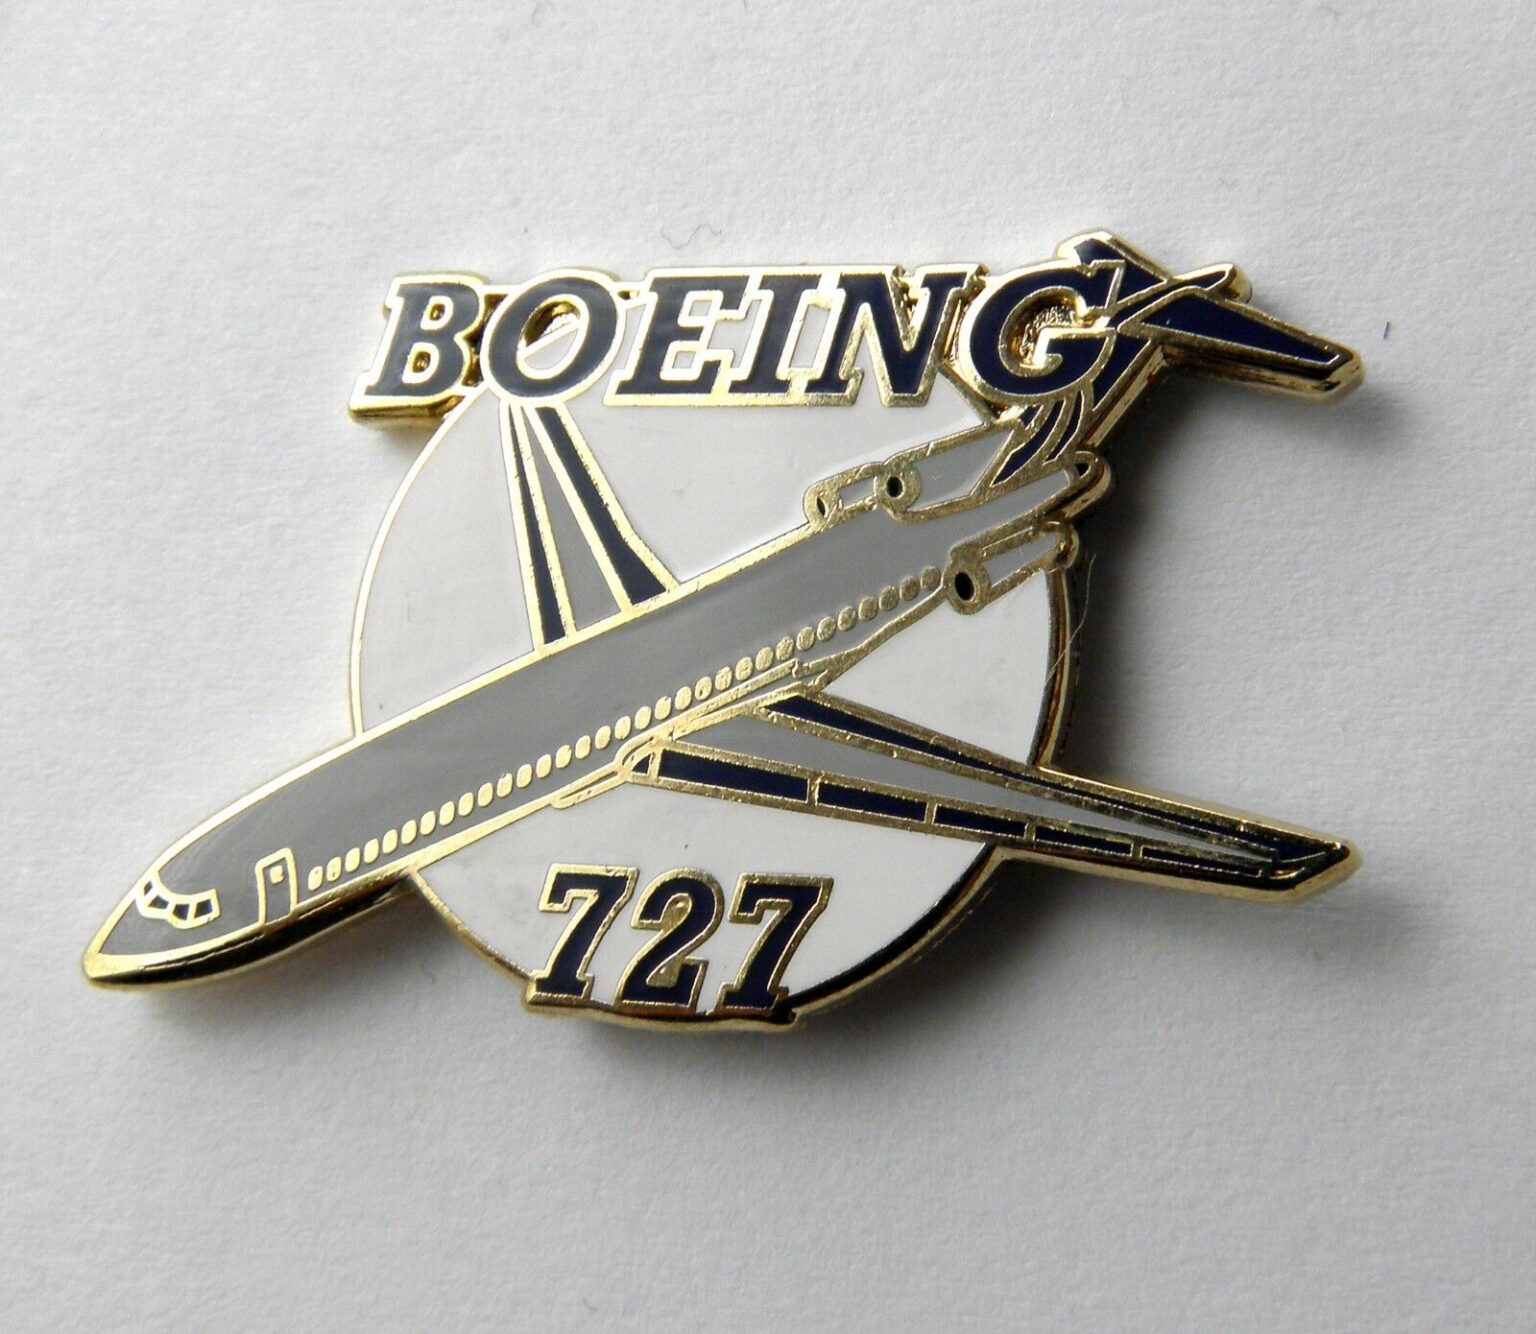 Boeing 727 Classic Passenger Aircraft Plane Lapel Pin Badge 15 Inches